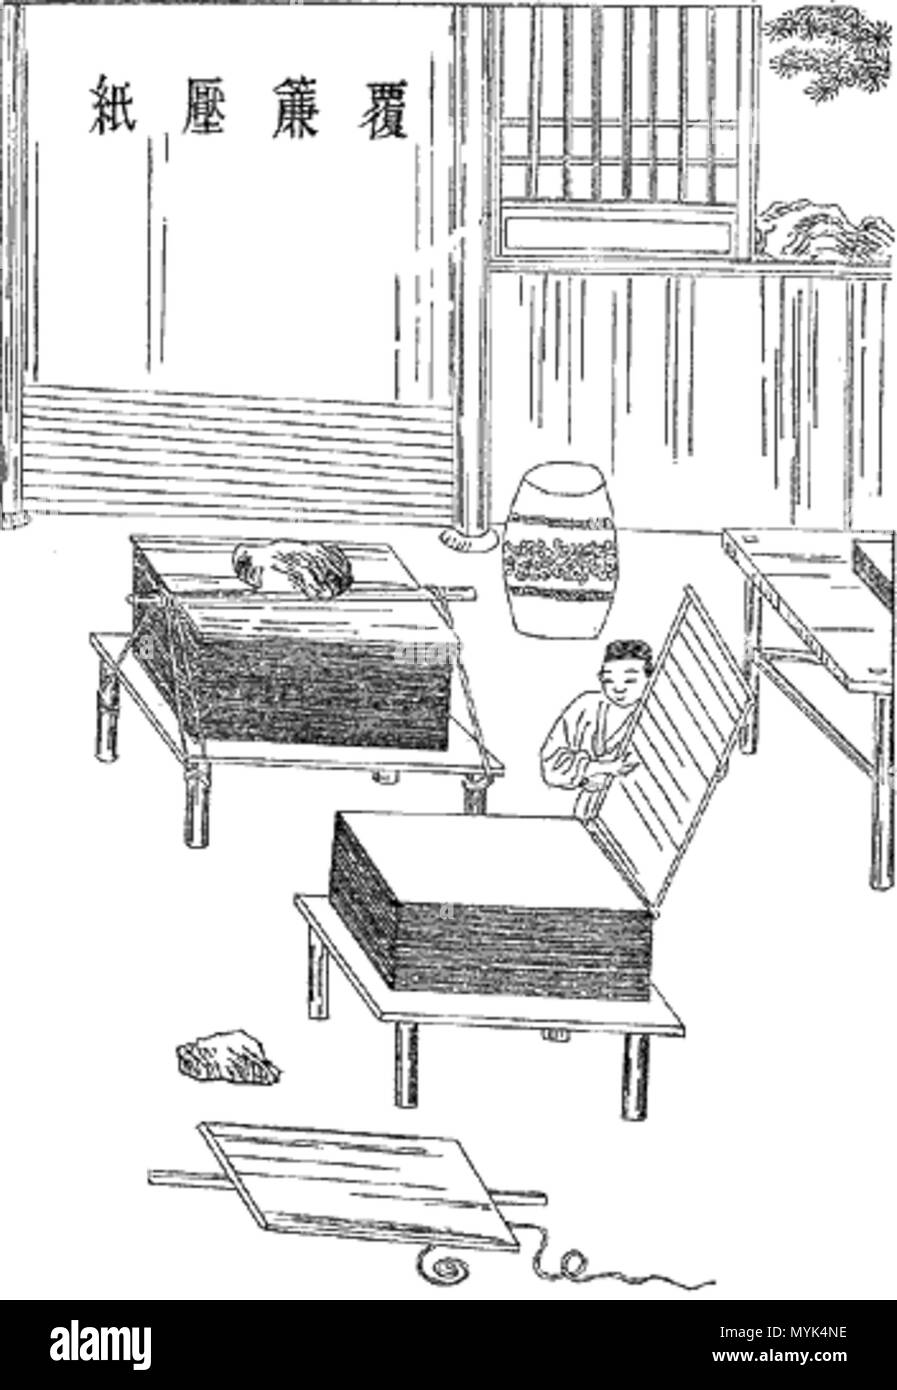 . An image of a Ming dynasty woodcut describing five major steps in ancient Chinese papermaking process as outlined by Cai Lun in 105 AD . This file is lacking author information. 339 Making Paper 4 Stock Photo